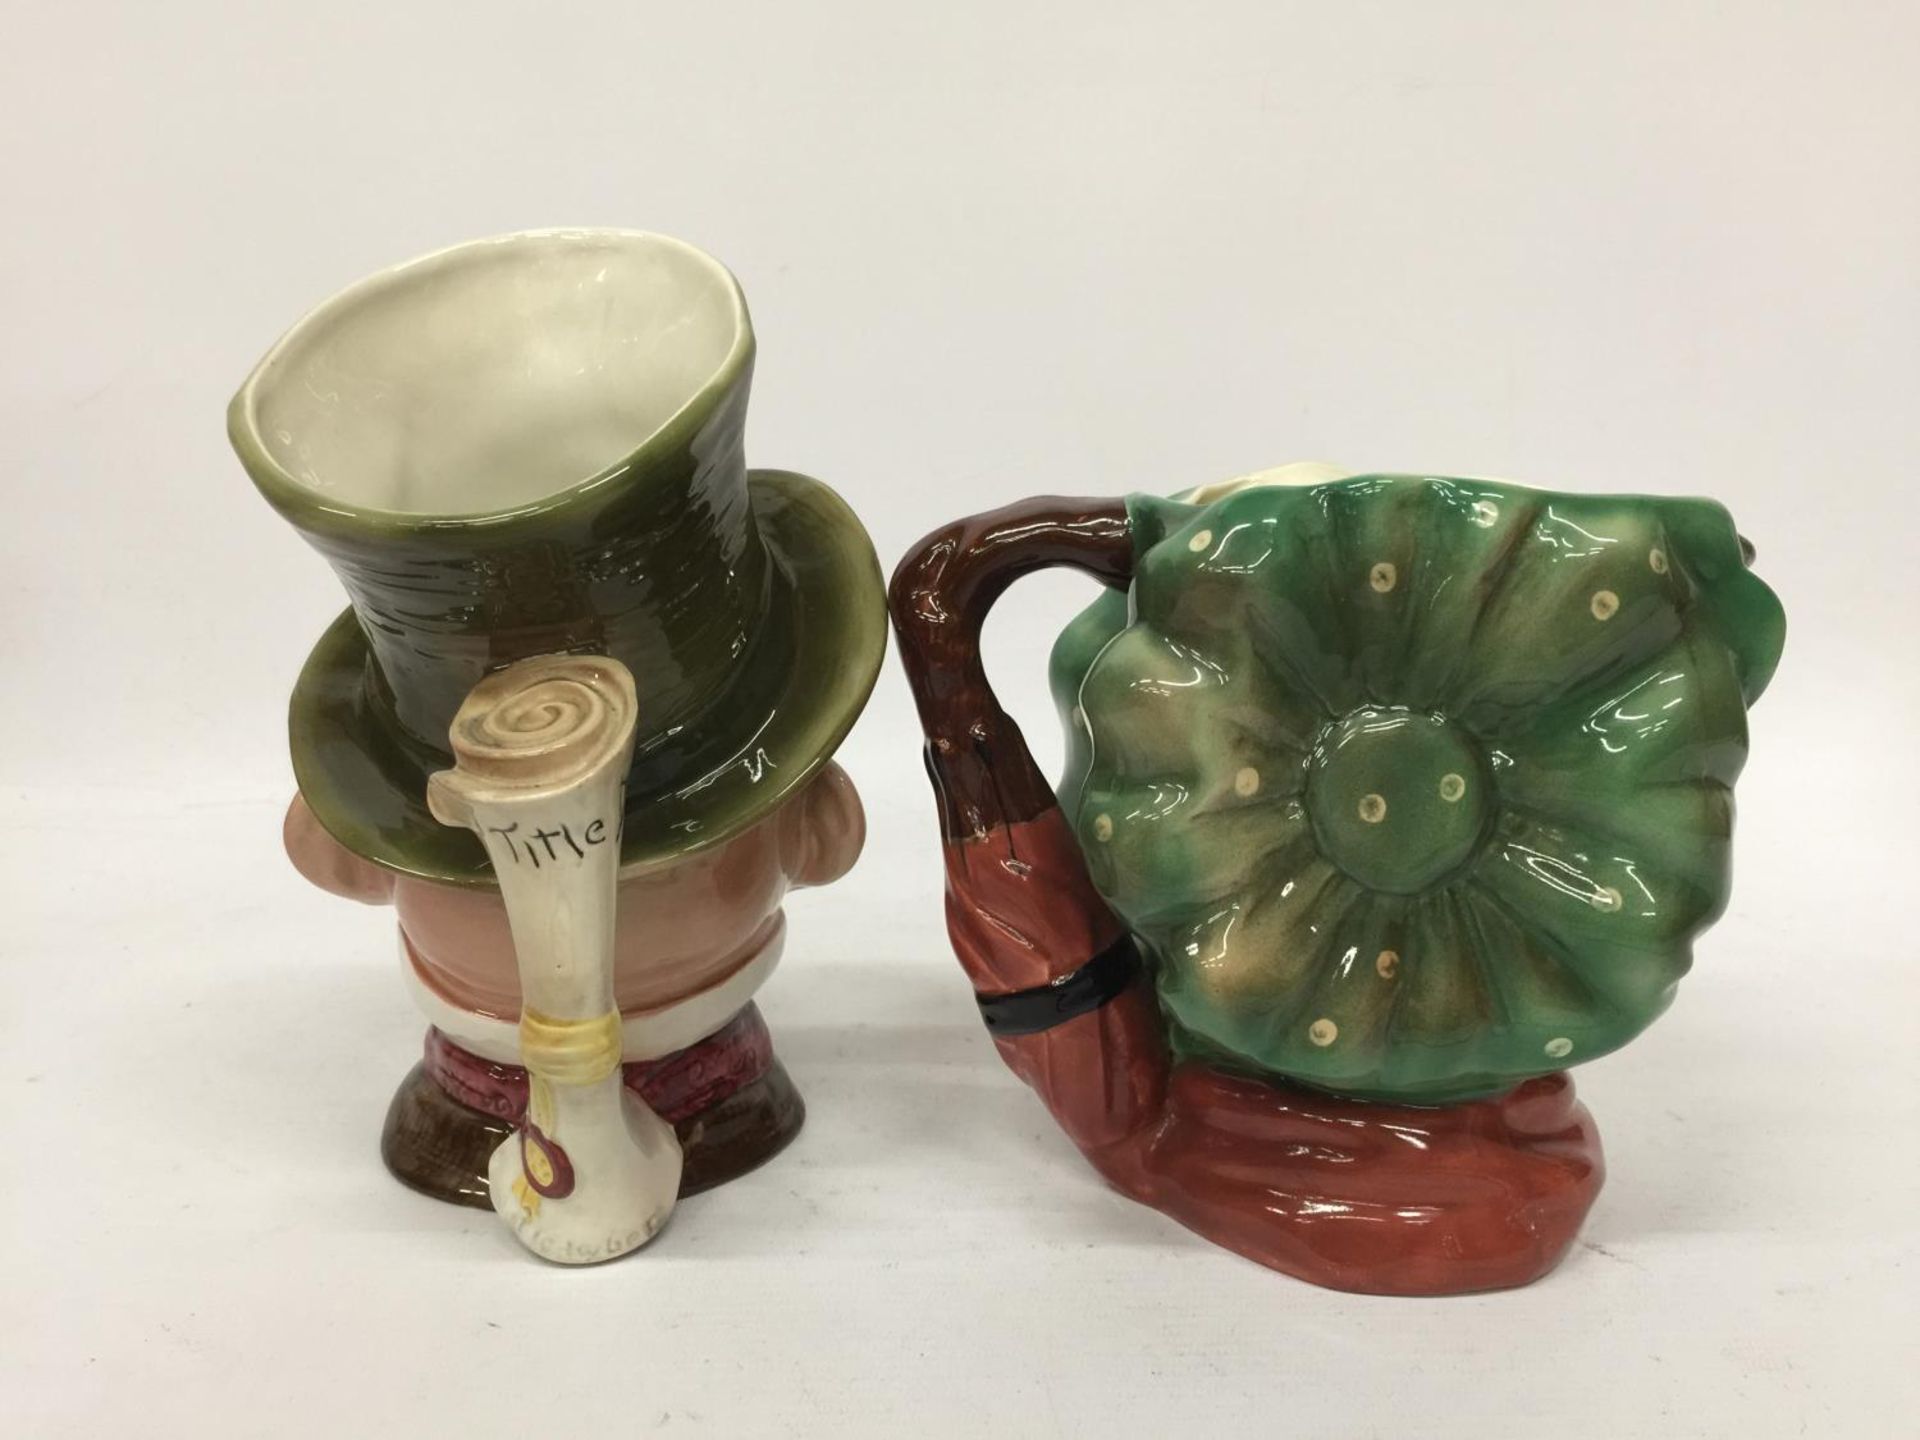 TWO BESWICK CHARACTER JUGS - MICAWBER AND SAIREY GAMP - 23CM AND 16.5 CM - Image 3 of 6